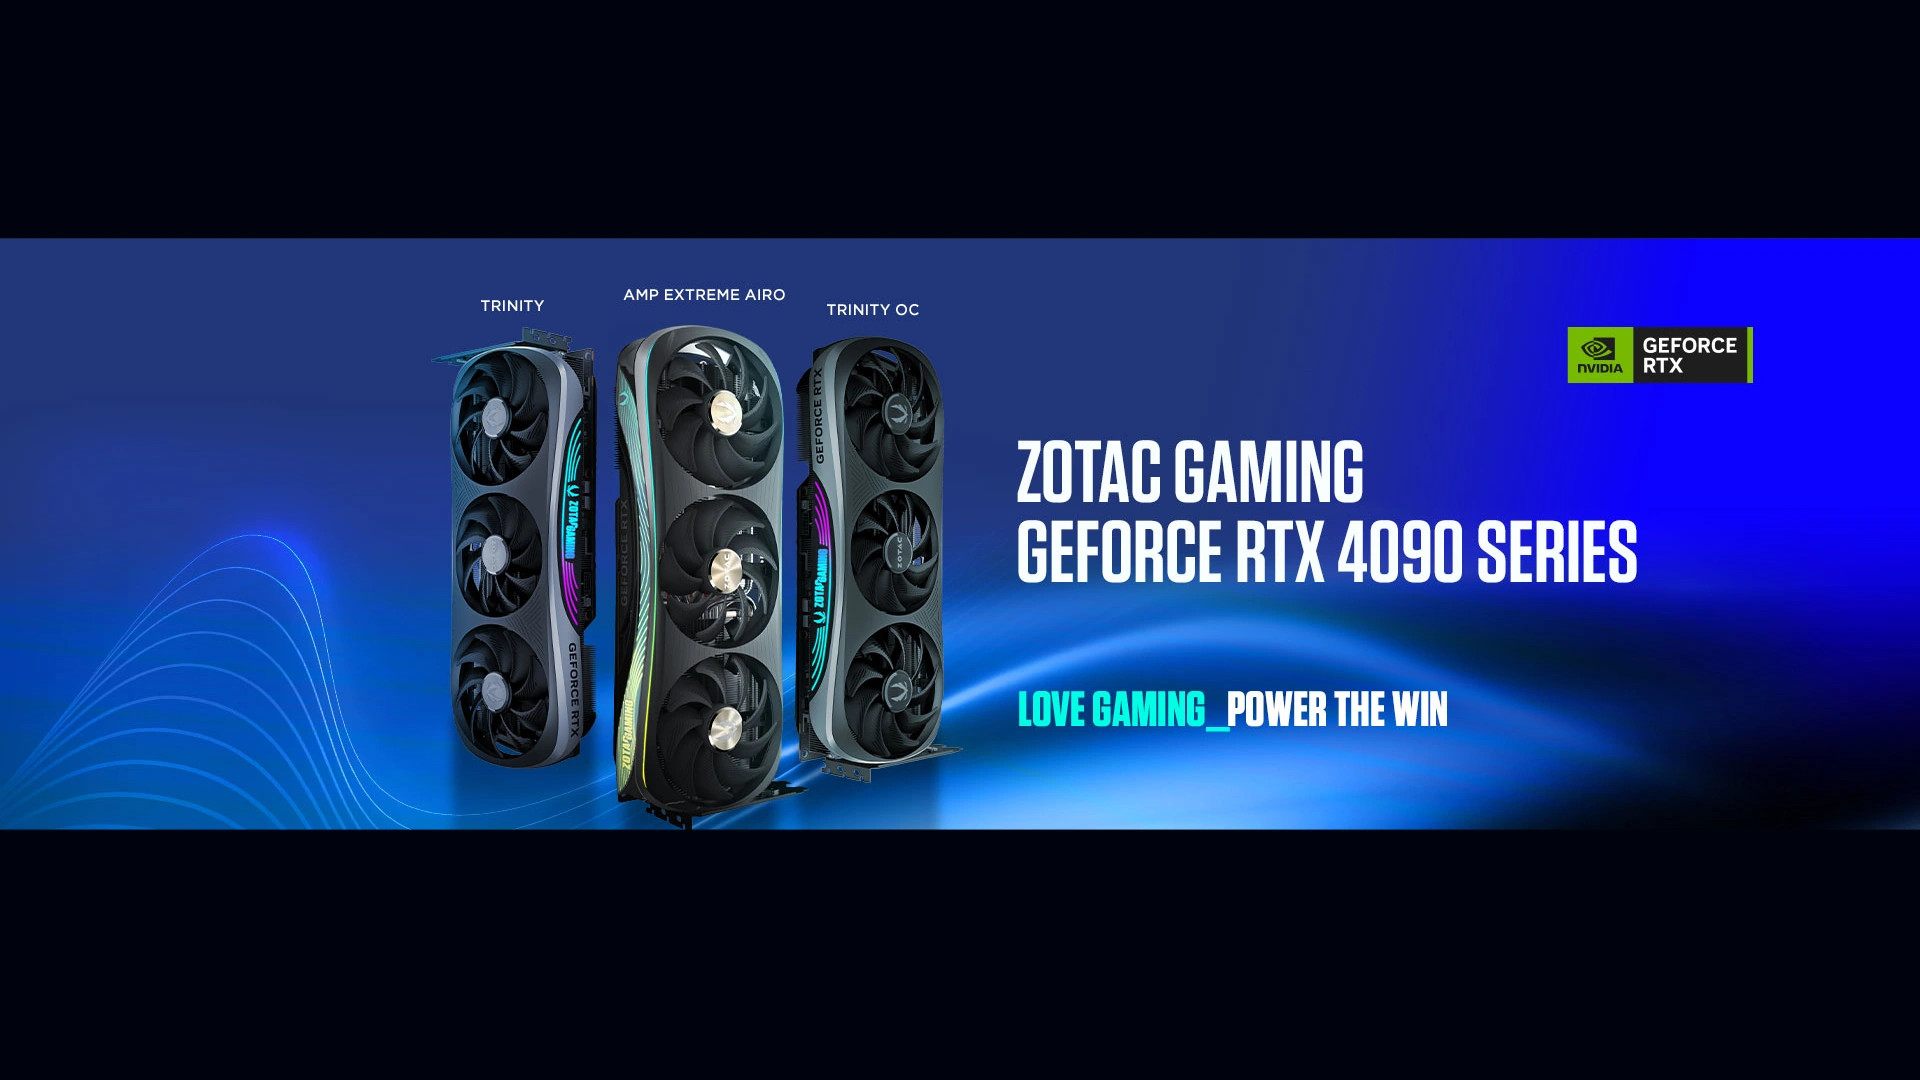 Zotac Gaming announces the GeForce RTX 40 series powered by the next generation GPU architecture